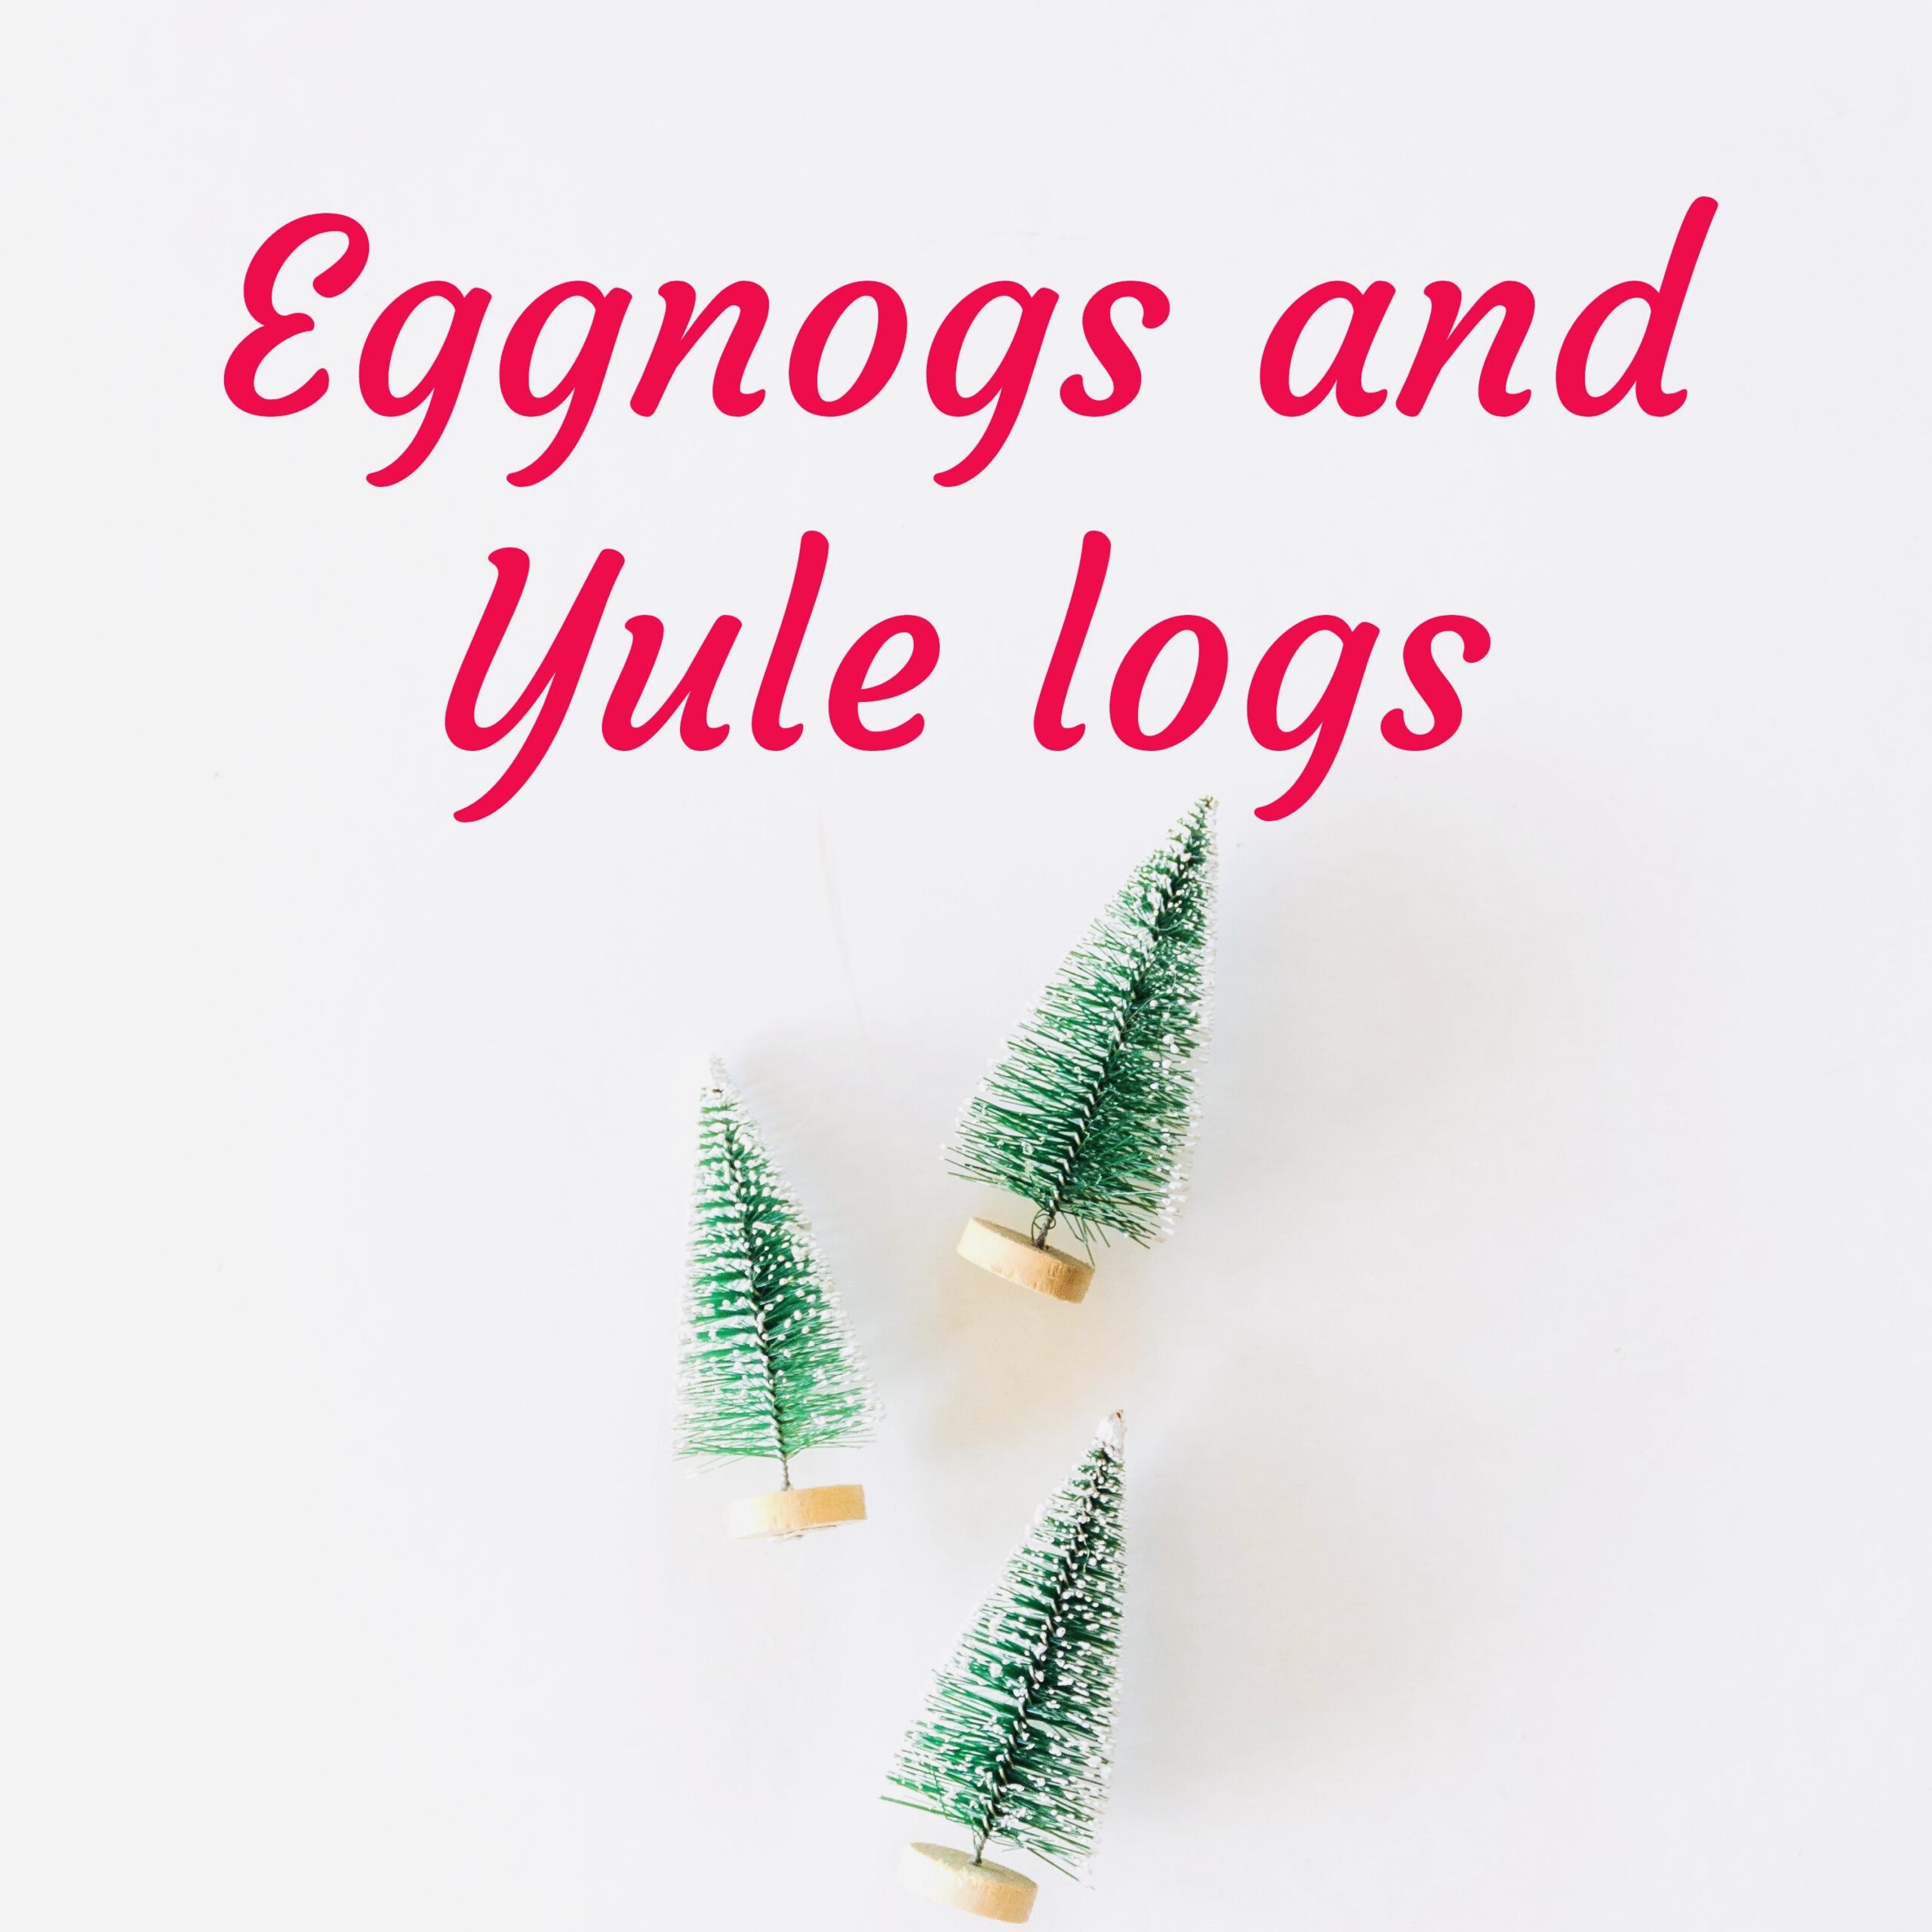 Eggnogs and Yule Logs